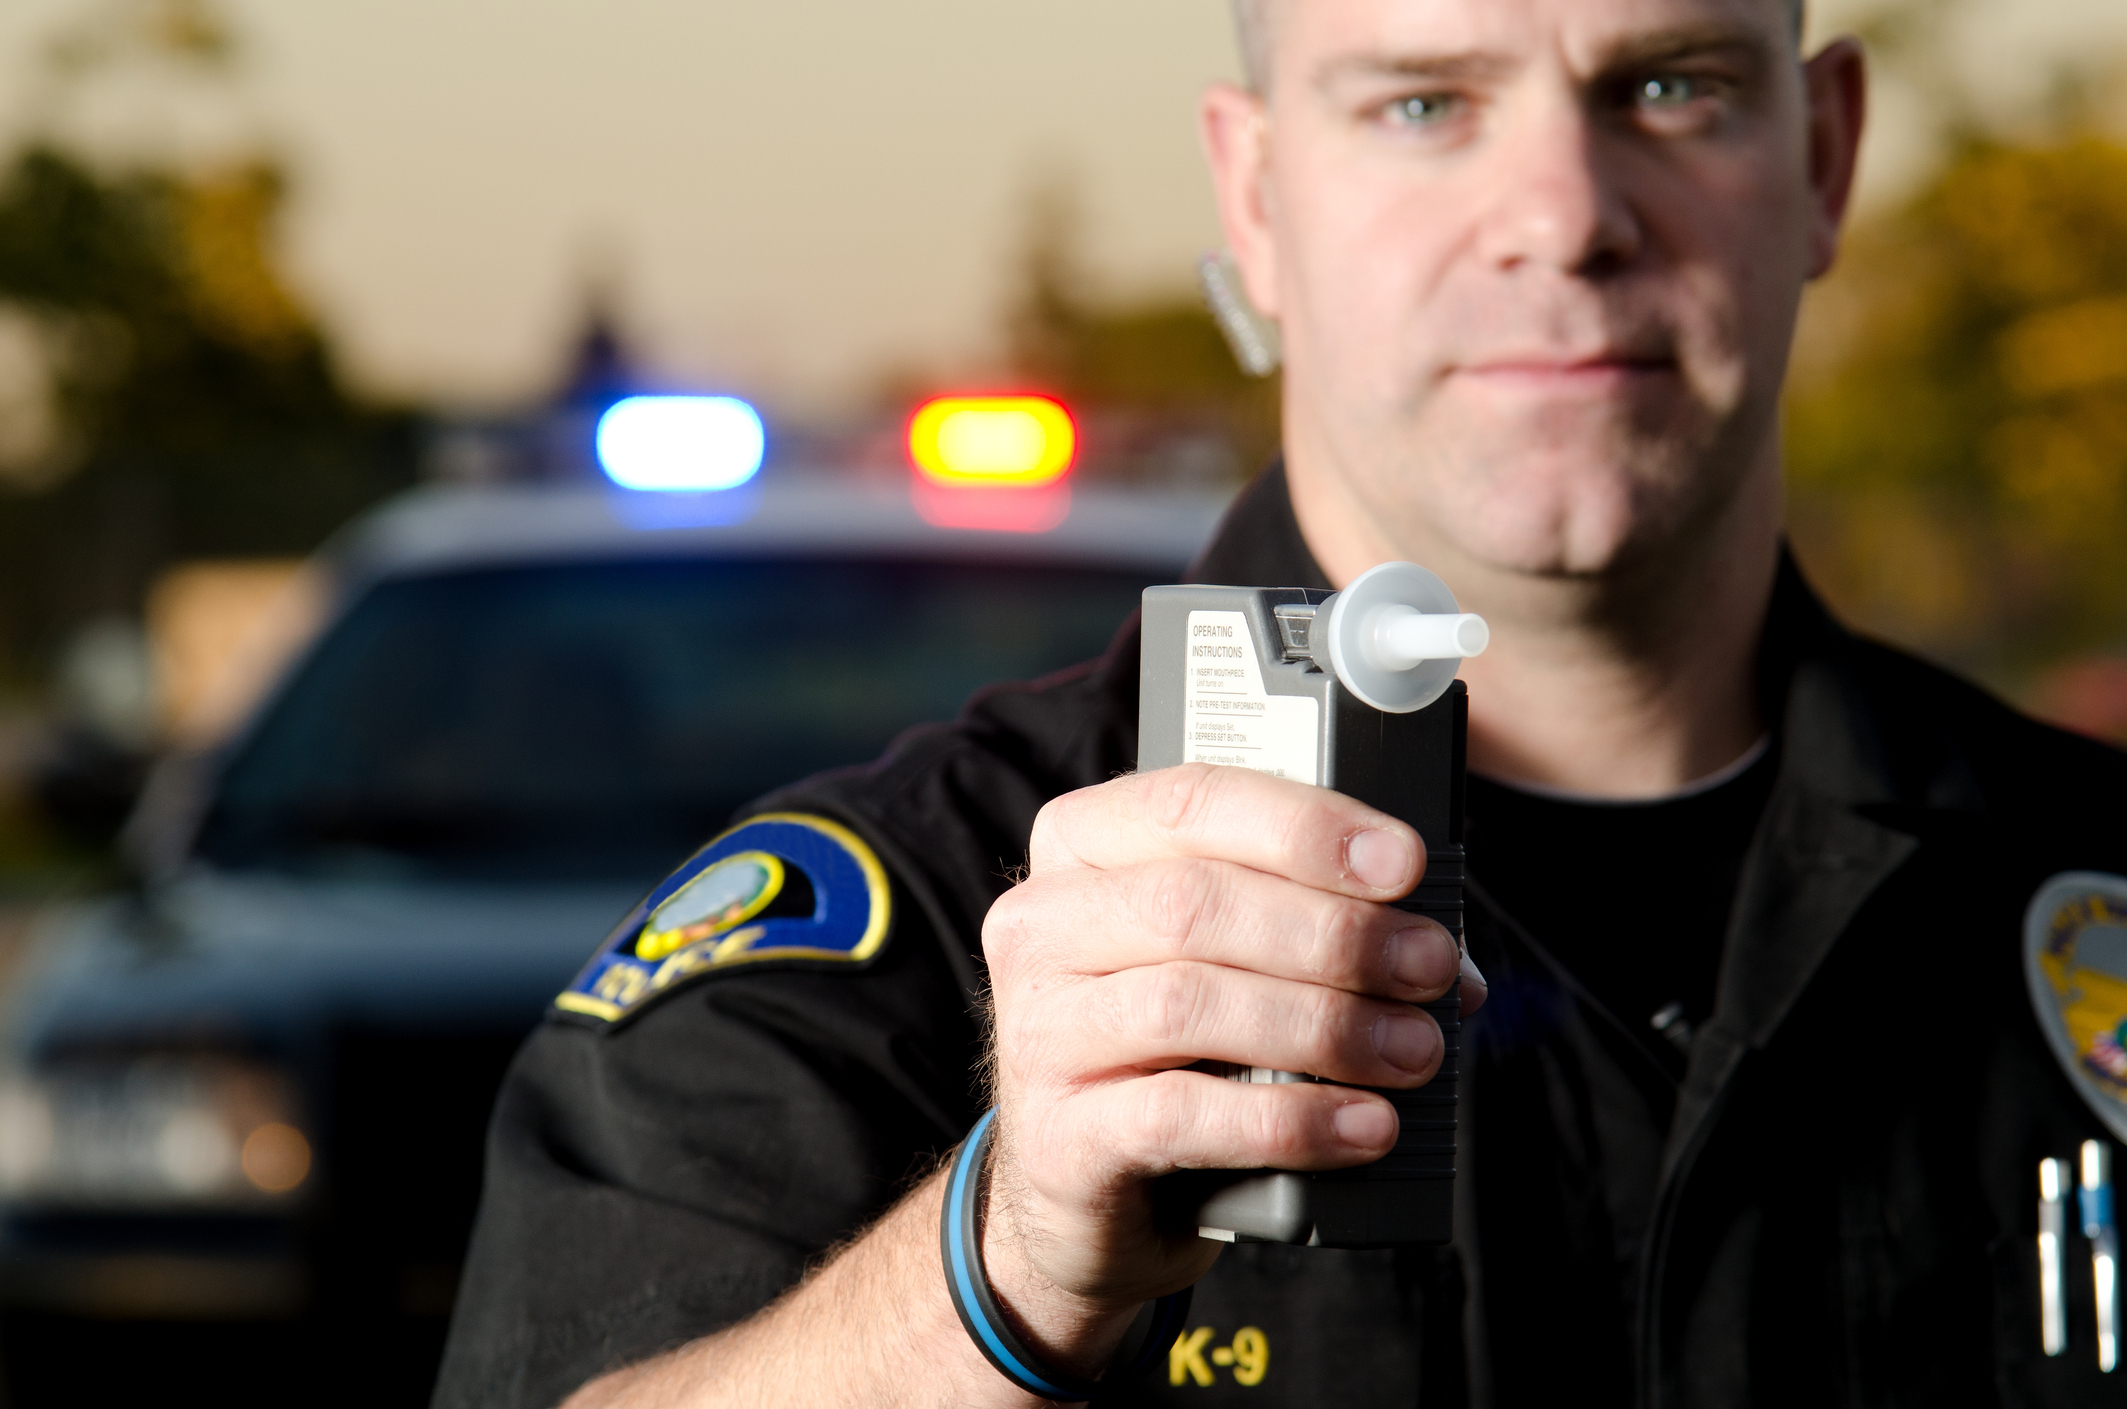 What rights do I have during a DUI/DWI stop?